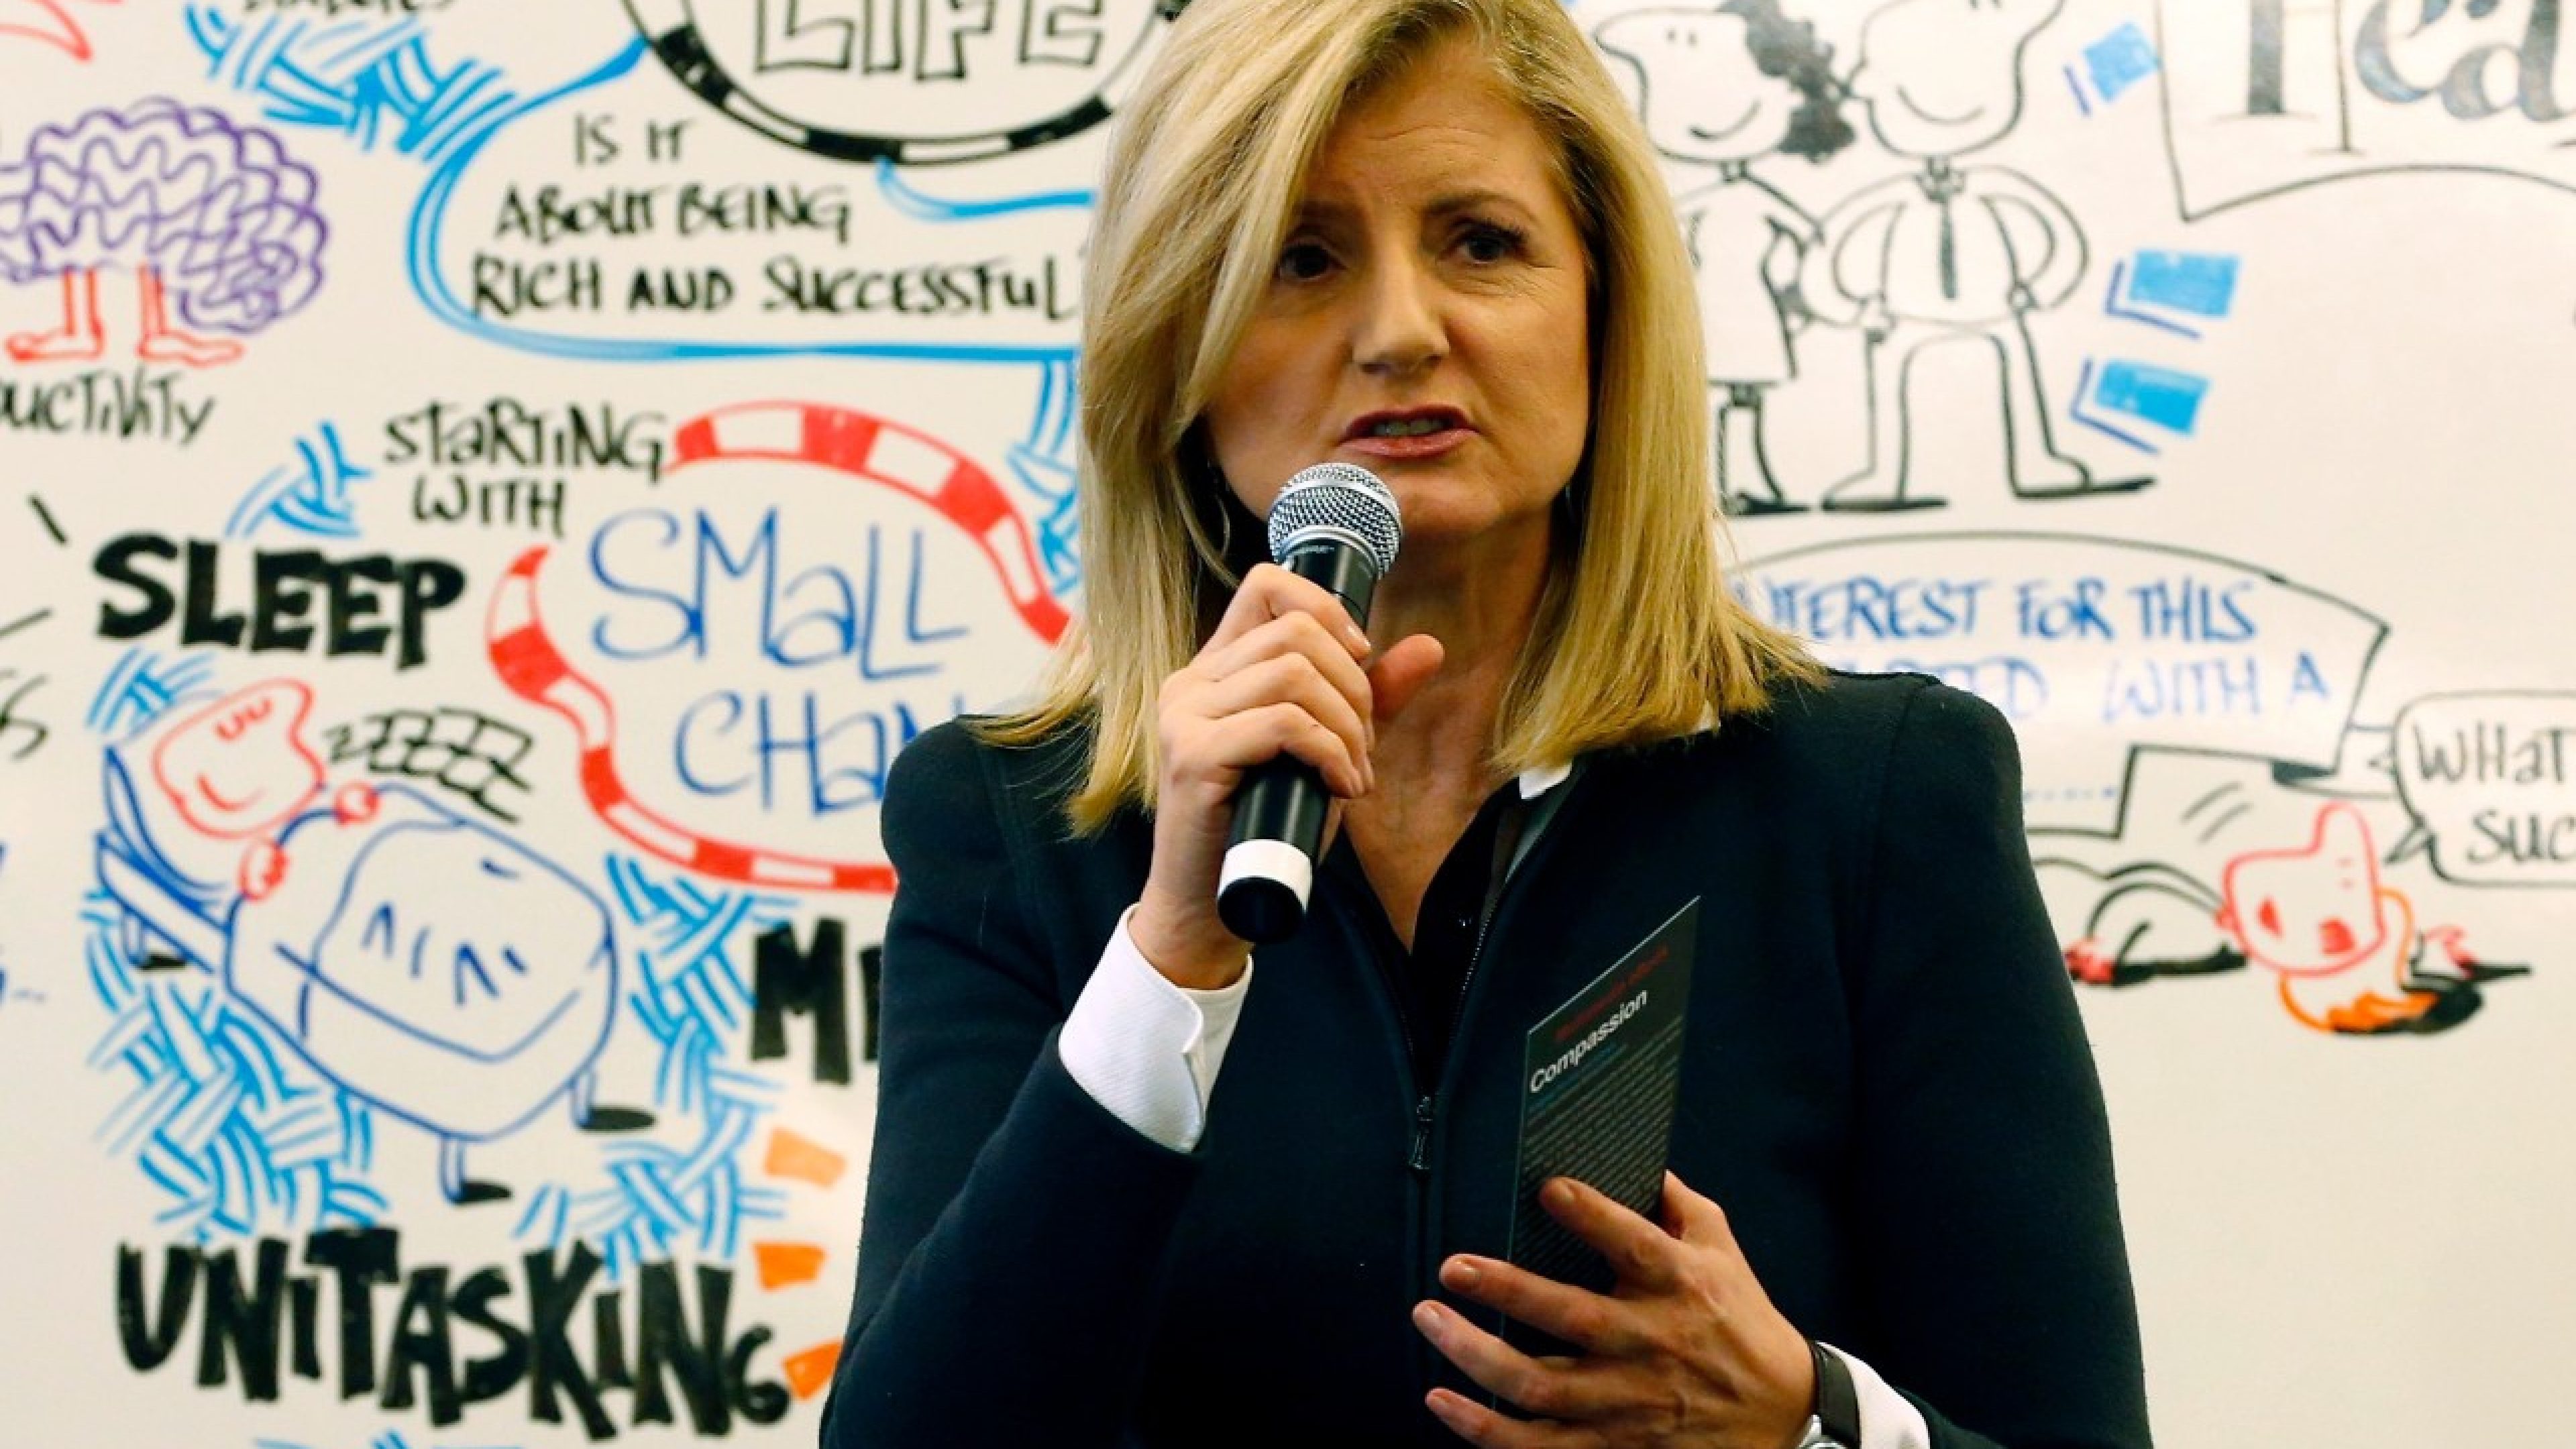 Arianna Huffington, president and Editor-in-Chief of The Huffington Post Media Group speaks during a session at the annual meeting of the World Economic Forum (WEF) in Davos January 24, 2014.                                                                 REUTERS/Ruben Sprich (SWITZERLAND  - Tags: POLITICS BUSINESS)   - RTX17SDB